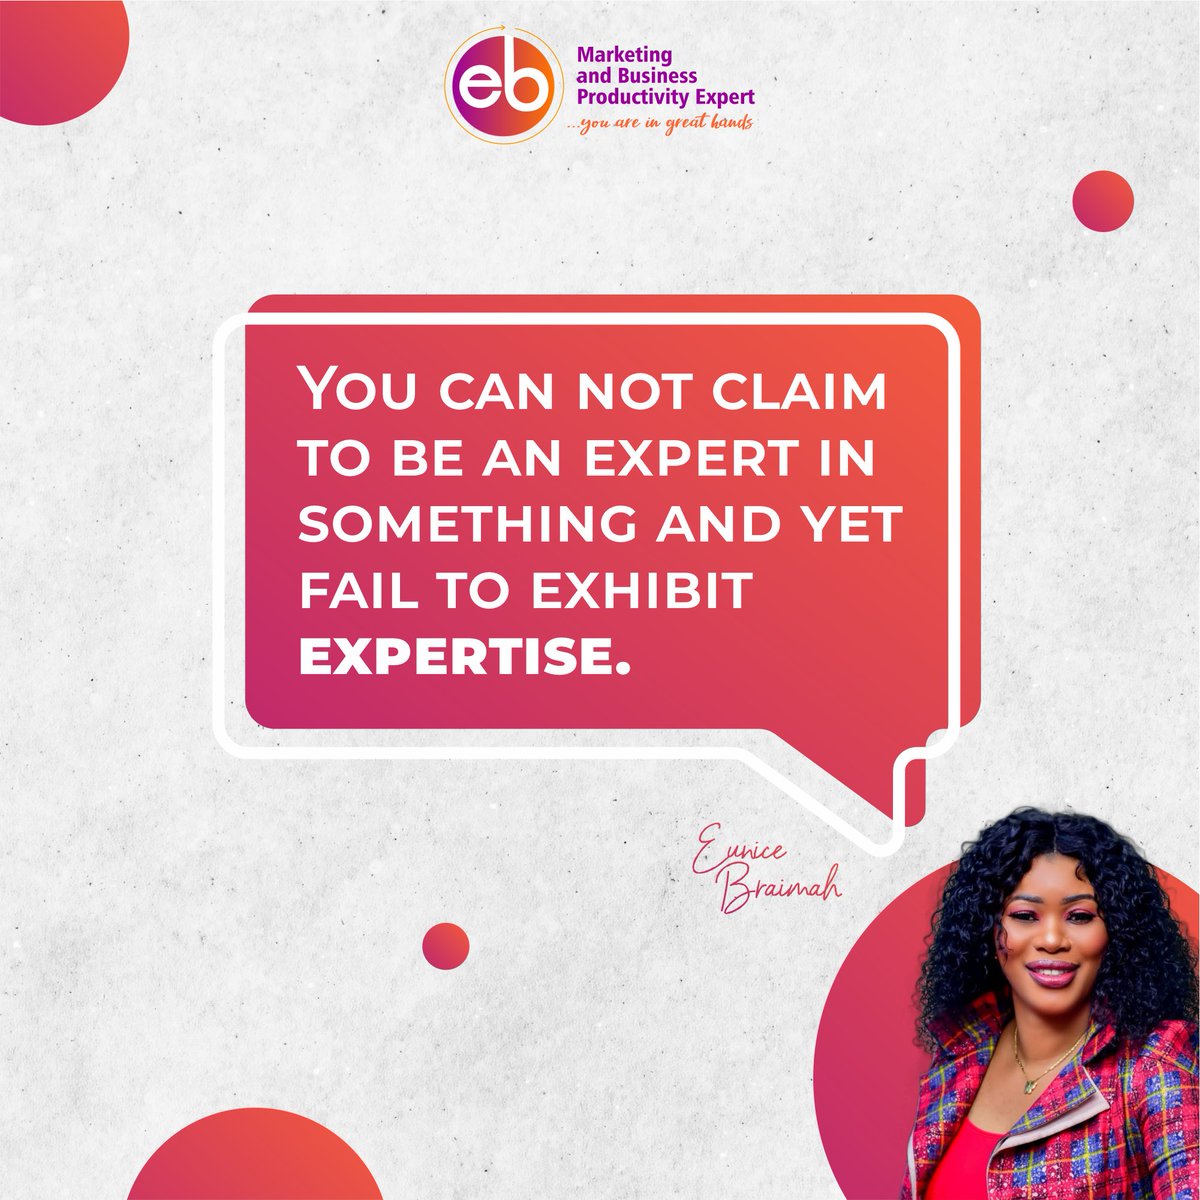 You can not claim to be an expert in something and yet fail to exhibit expertise- Eunice Braimah
.
.
#eunicebraimah #productivityguru #productivity #businessexpert #flawlessexecutions #lagos #marketingagency #marketingadvice